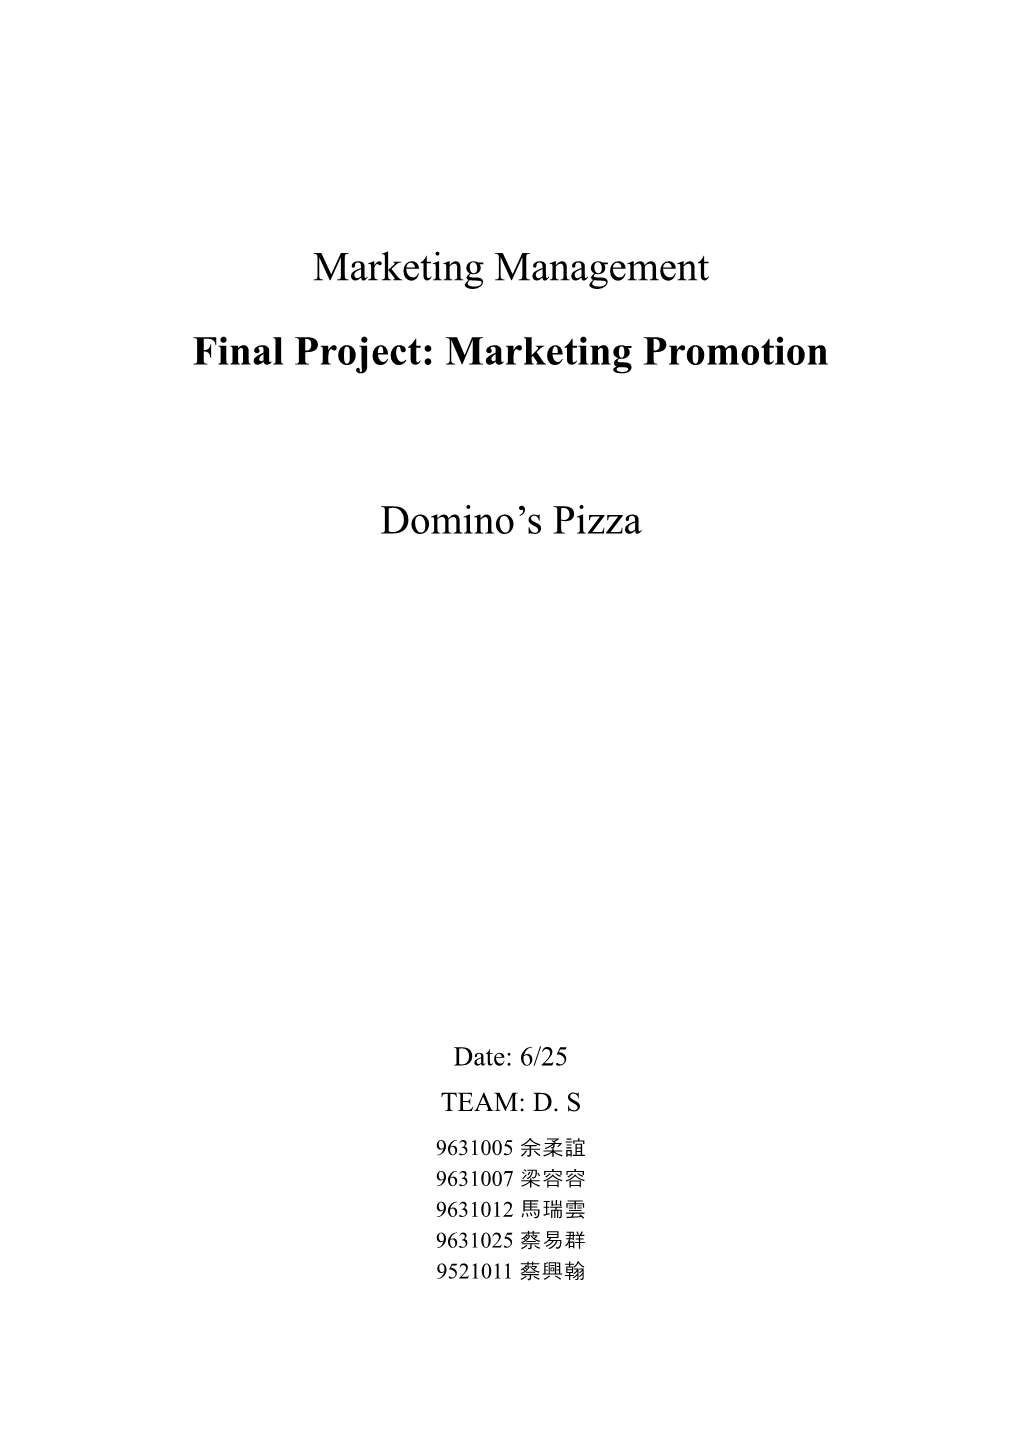 Final Project: Marketing Promotion